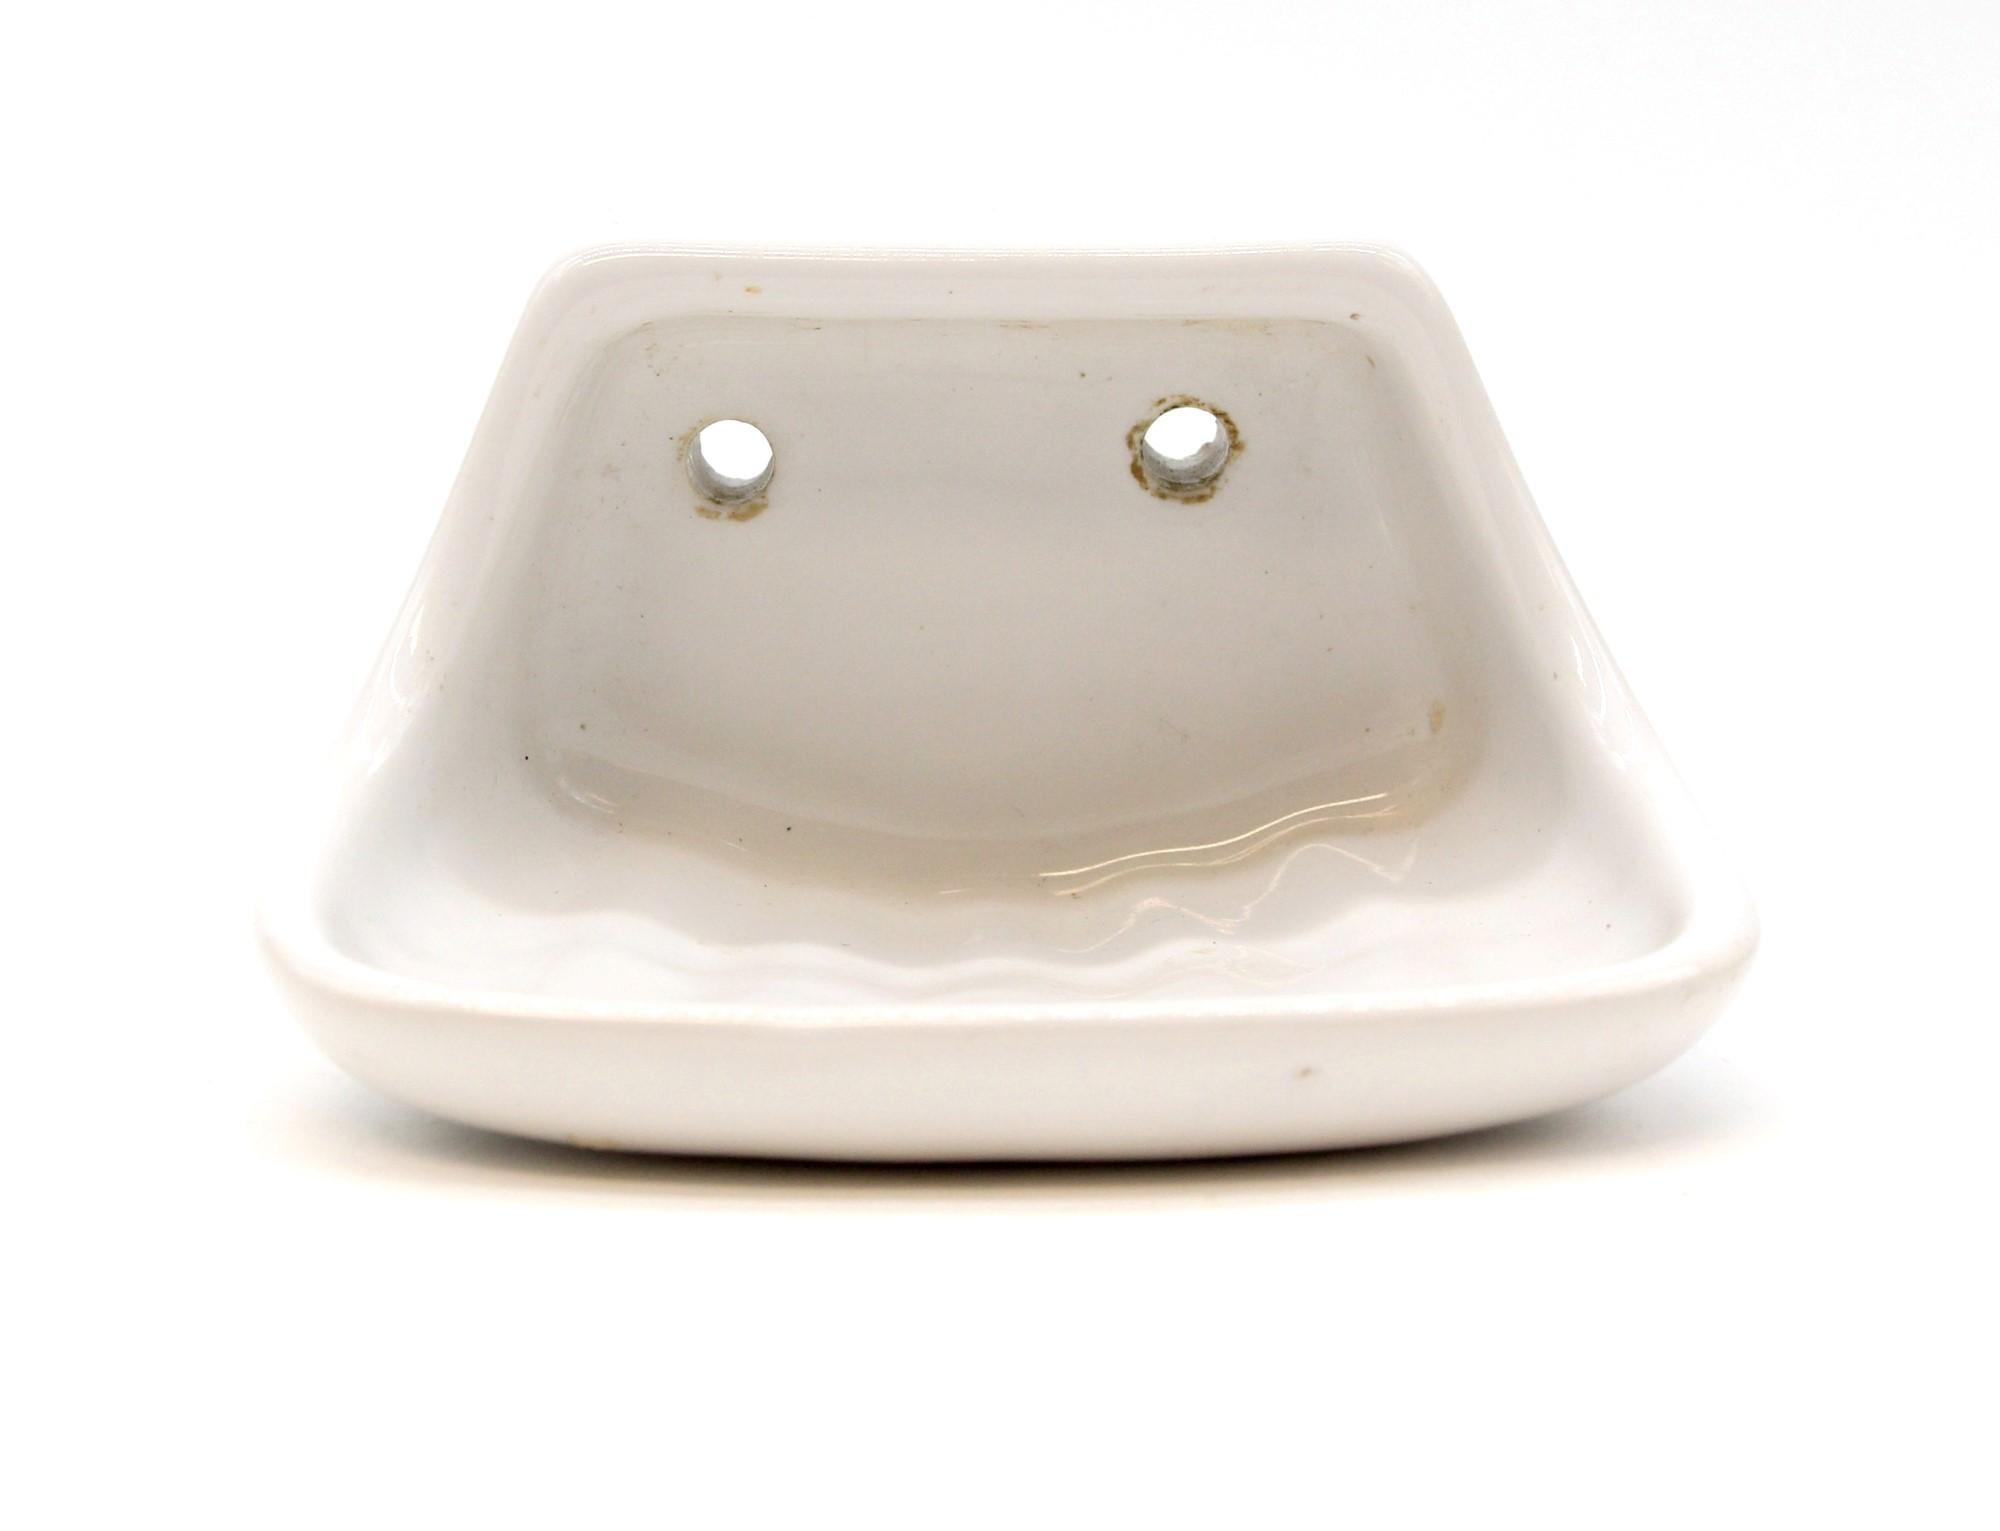 White ceramic soap dish from Belgium. Can be surface mounted with two screws. Small quantity available at time of posting. Priced each. Please inquire. Please note, this item is located in our Scranton, PA location.